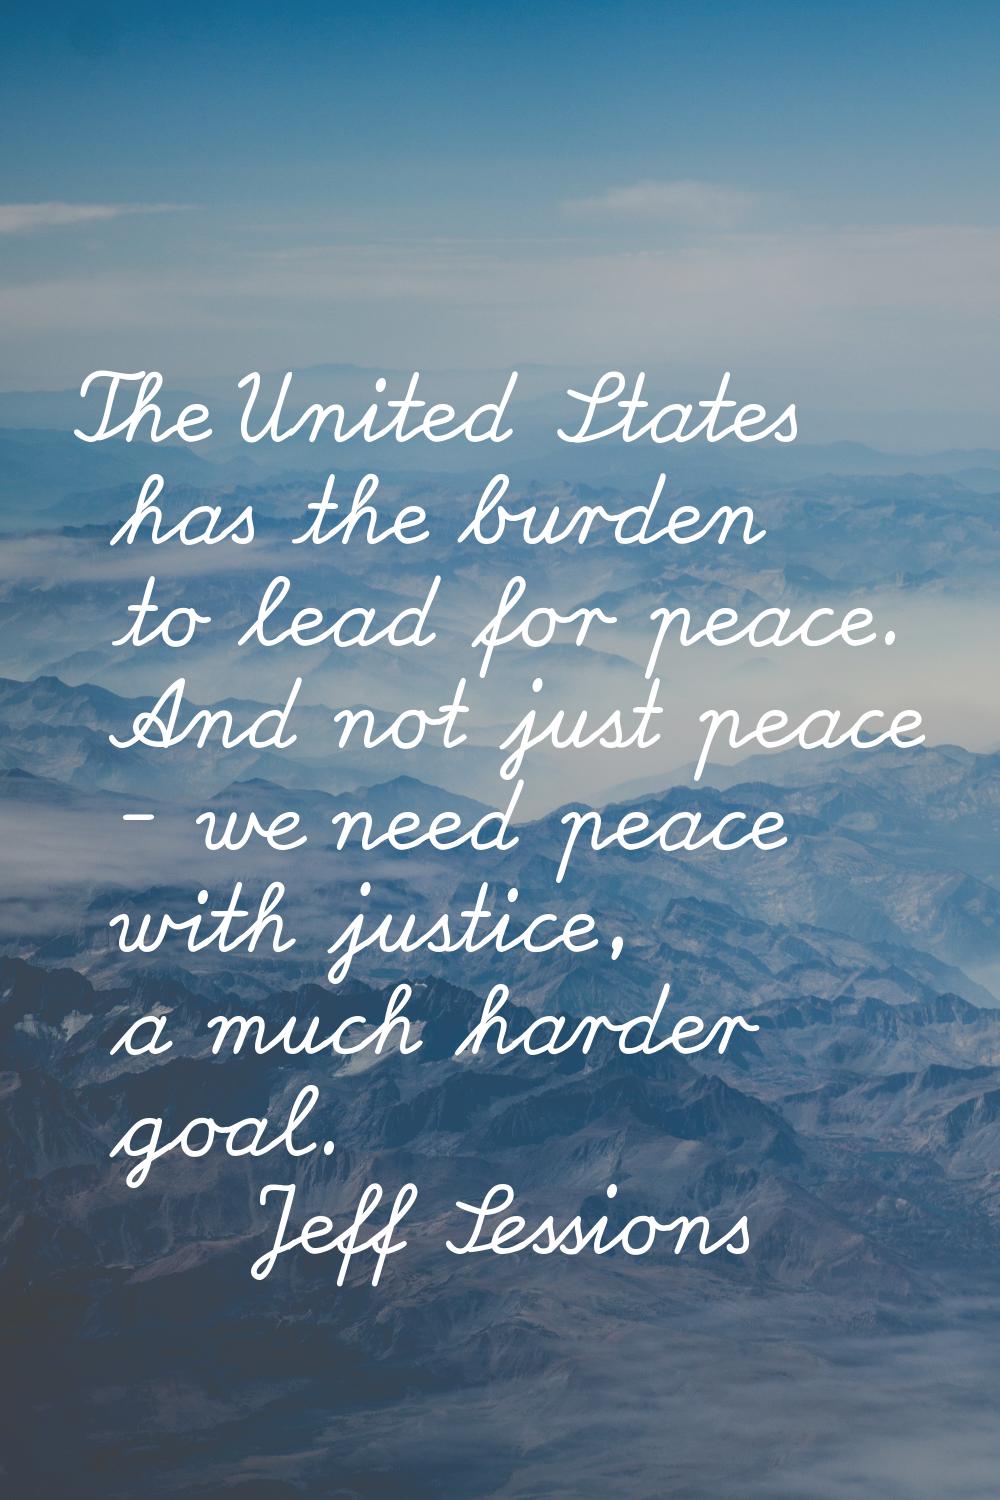 The United States has the burden to lead for peace. And not just peace - we need peace with justice